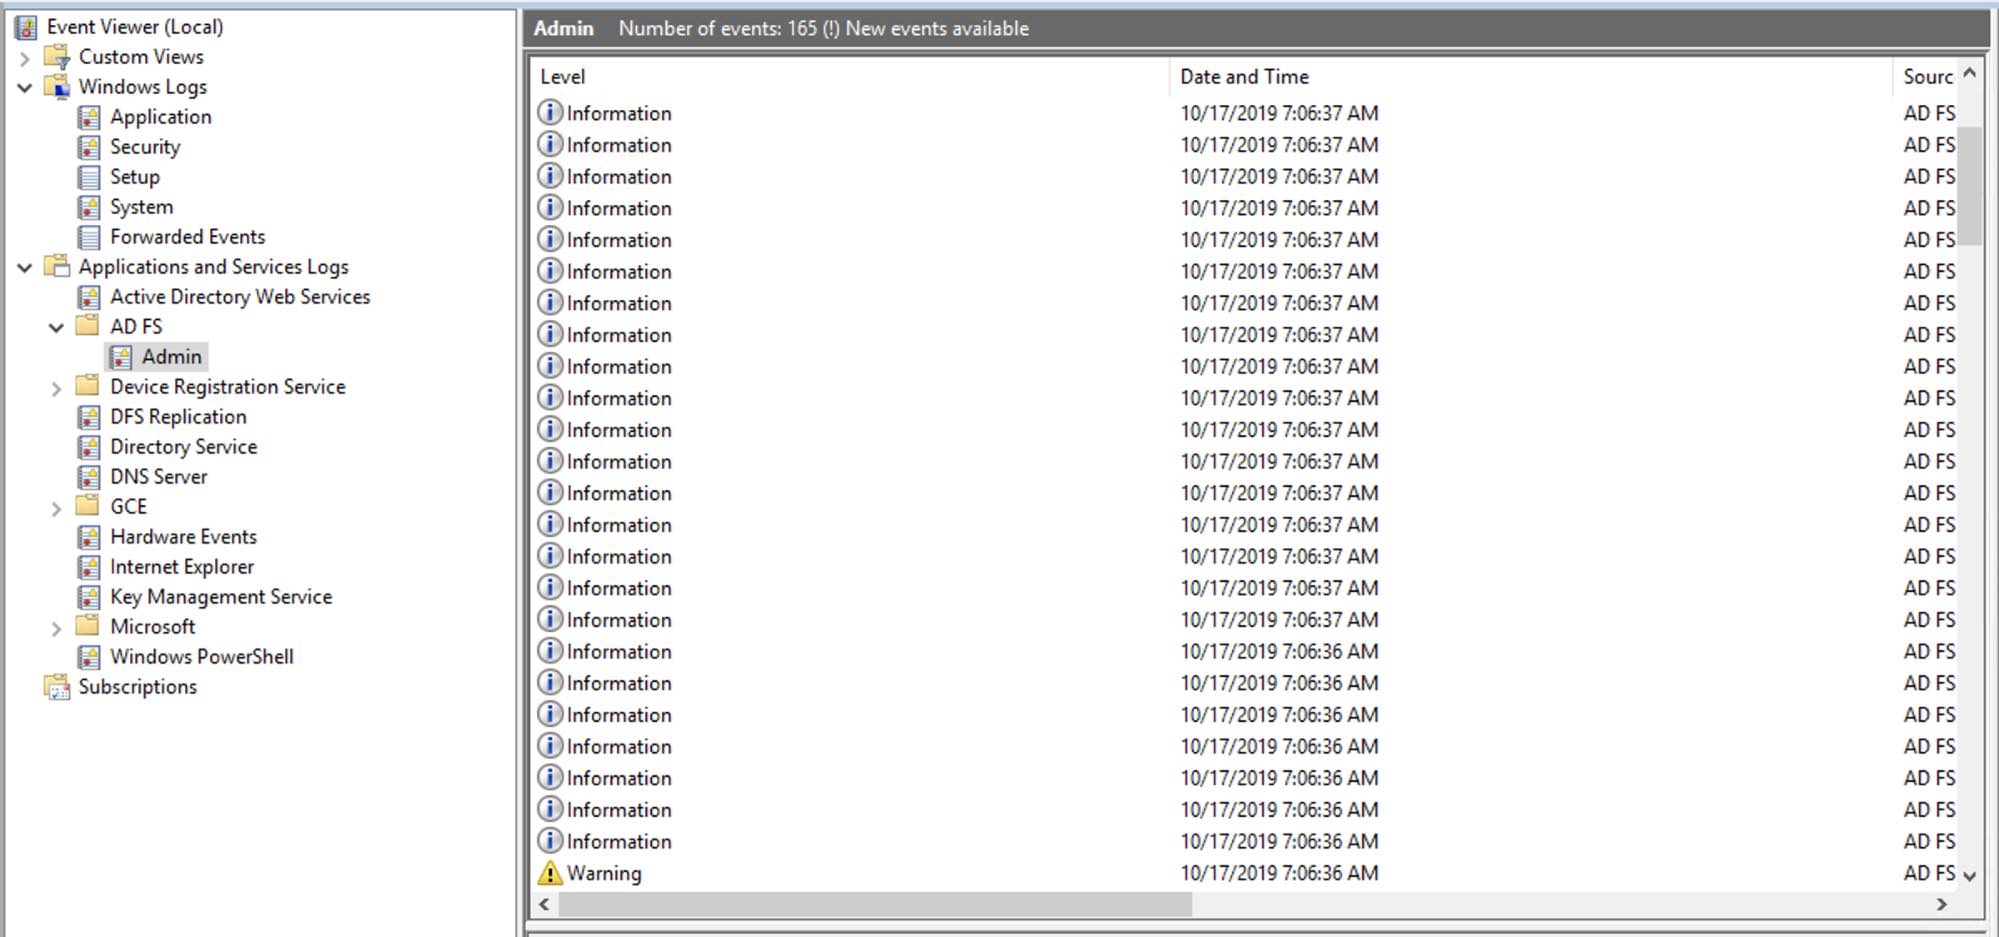 Checking ADFS logs in the Event Viewer